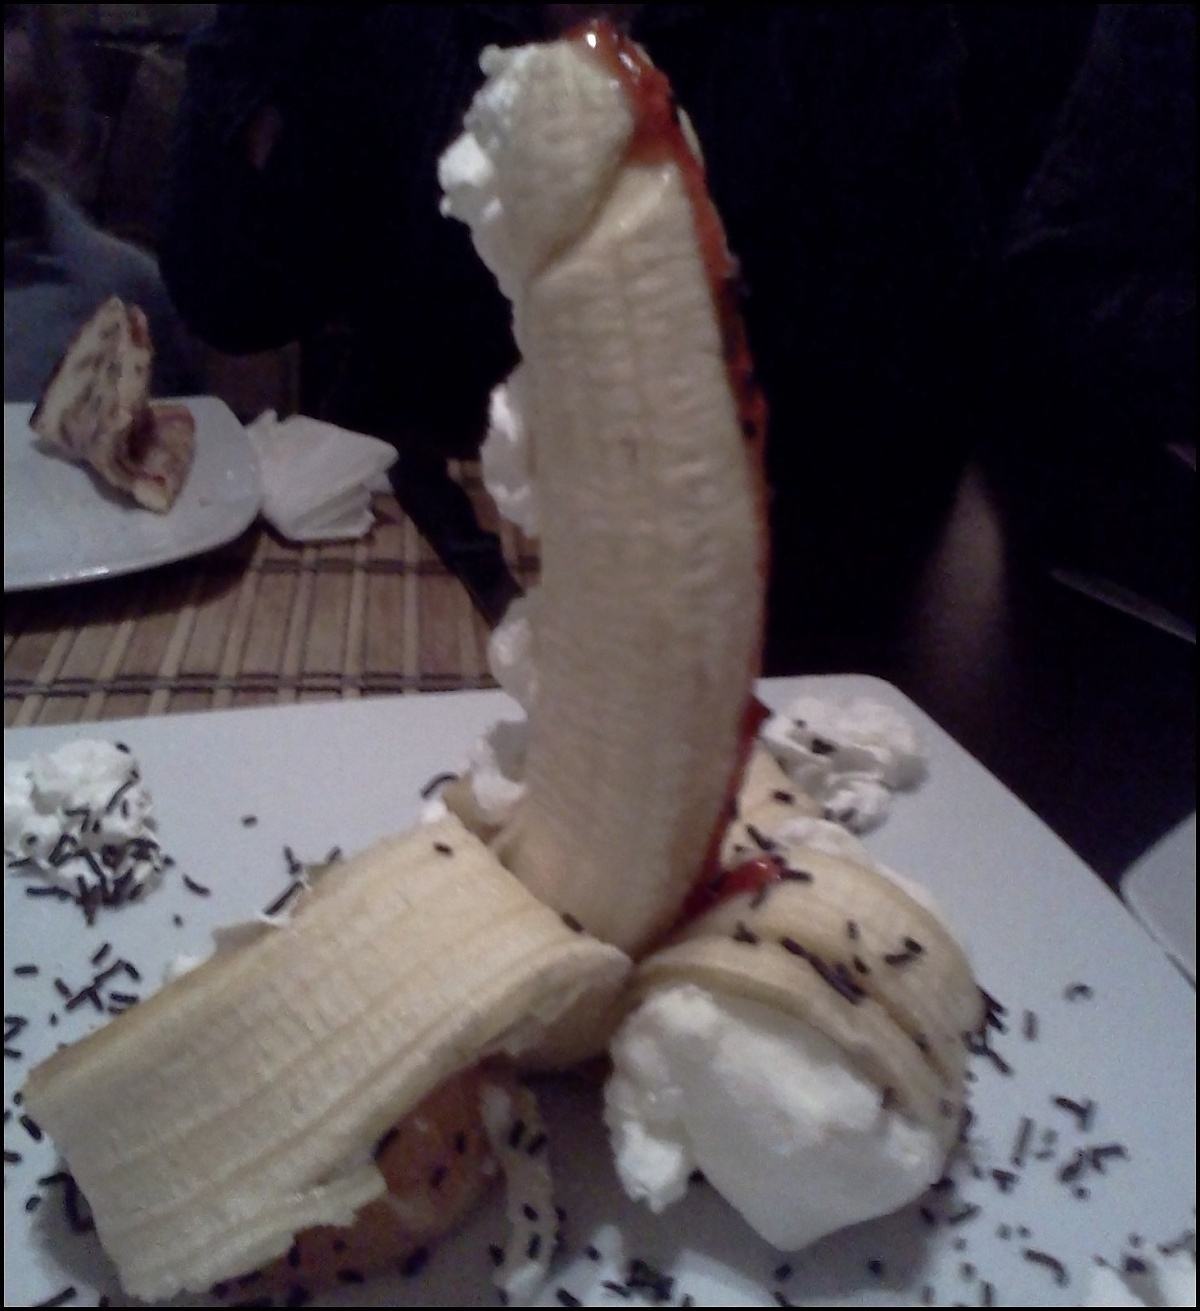 Obrázek - I ordered an Intimate Banana - I dont know what I expected -      22.01.2013